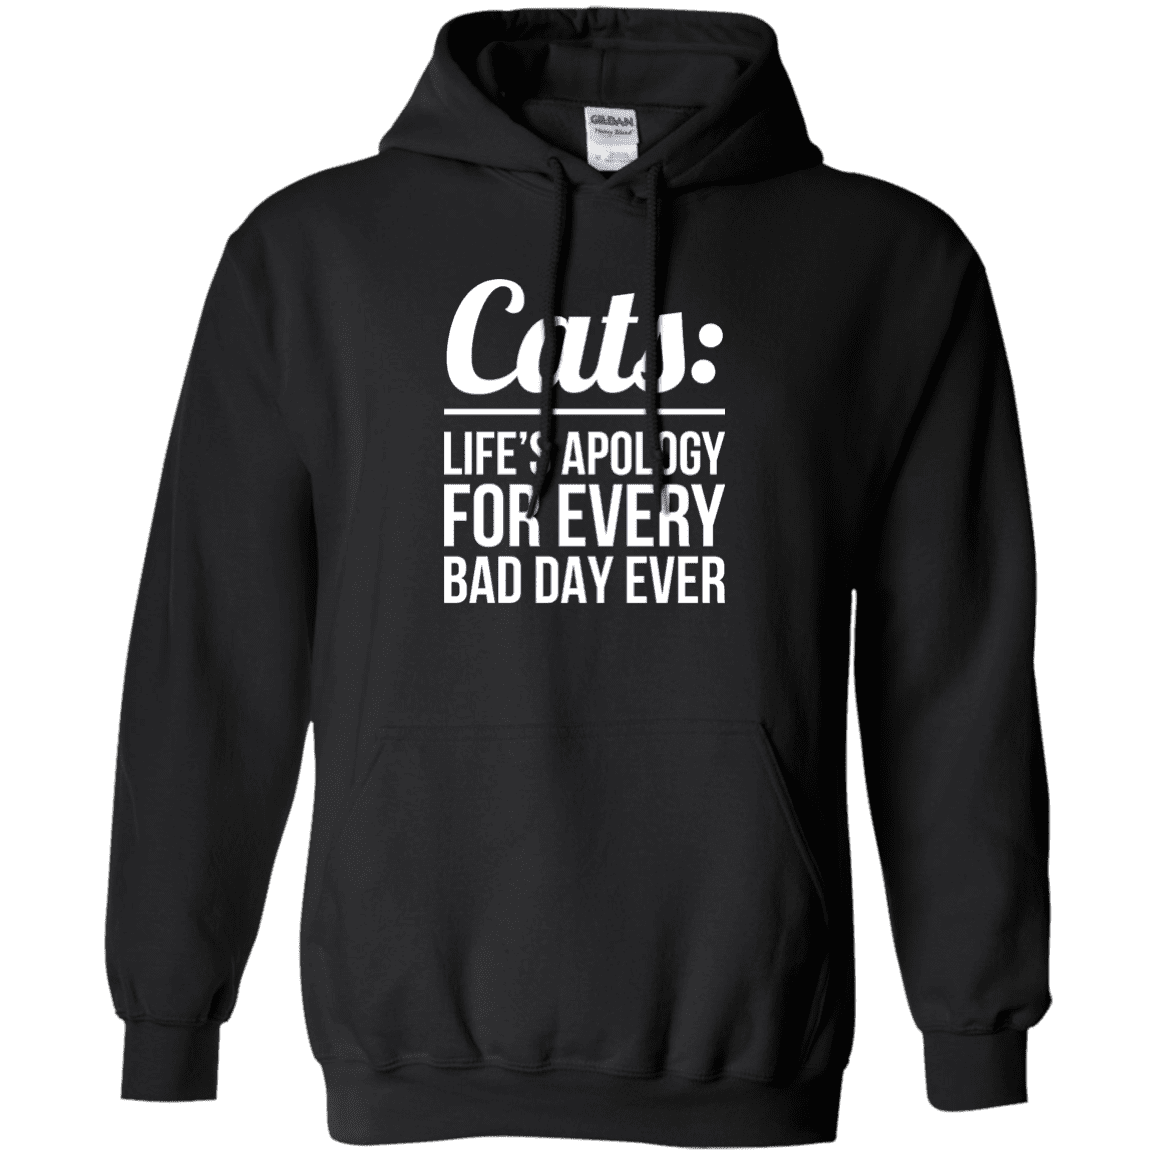 Cats Life's Apology - Hoodie.